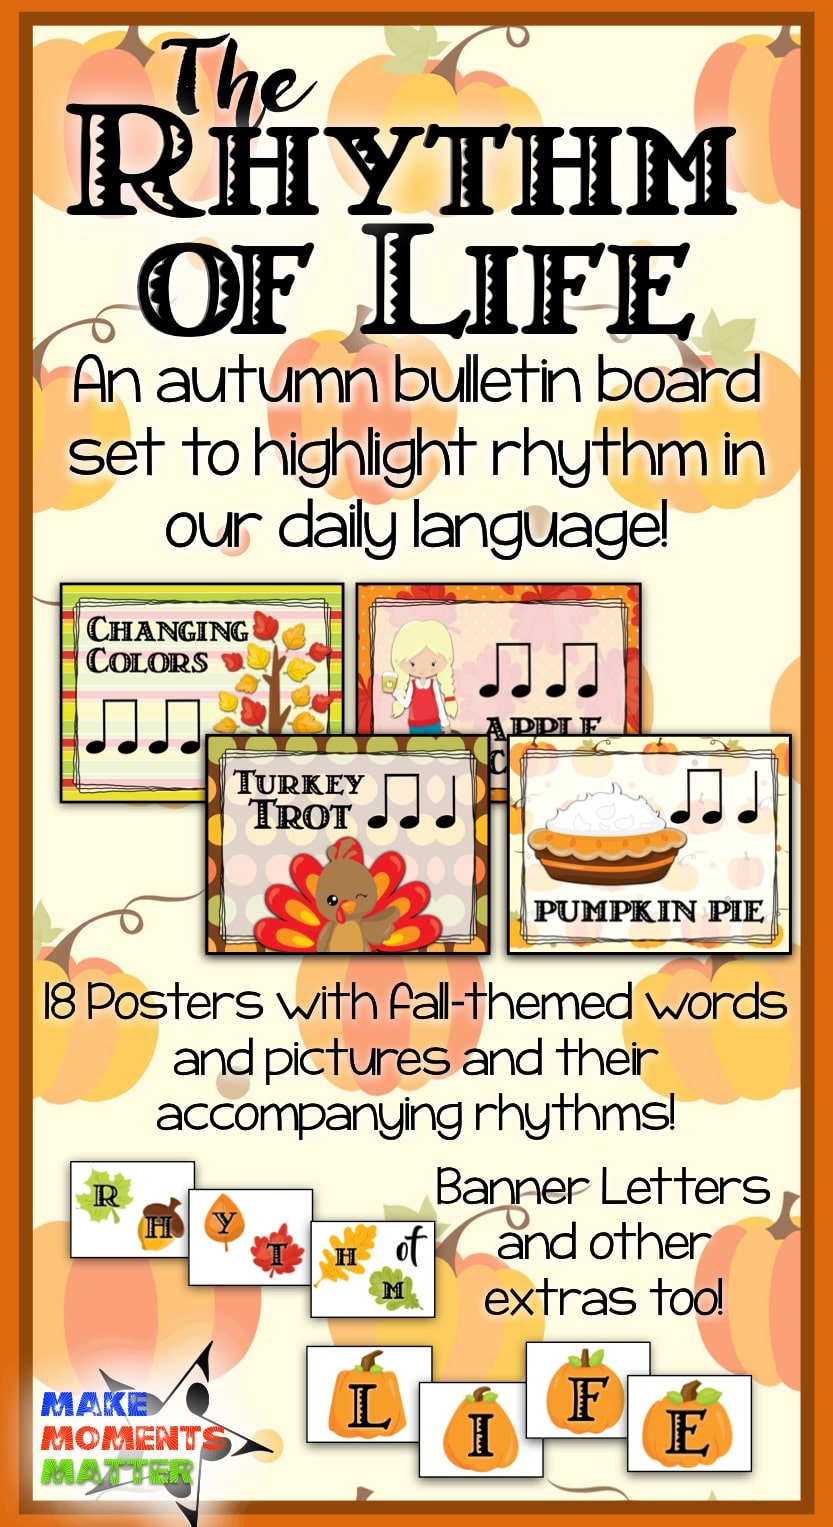 Rhythm on the Wall - Content Driven Bulletin Board Ideas - Make Intended For Bulletin Board Template Word